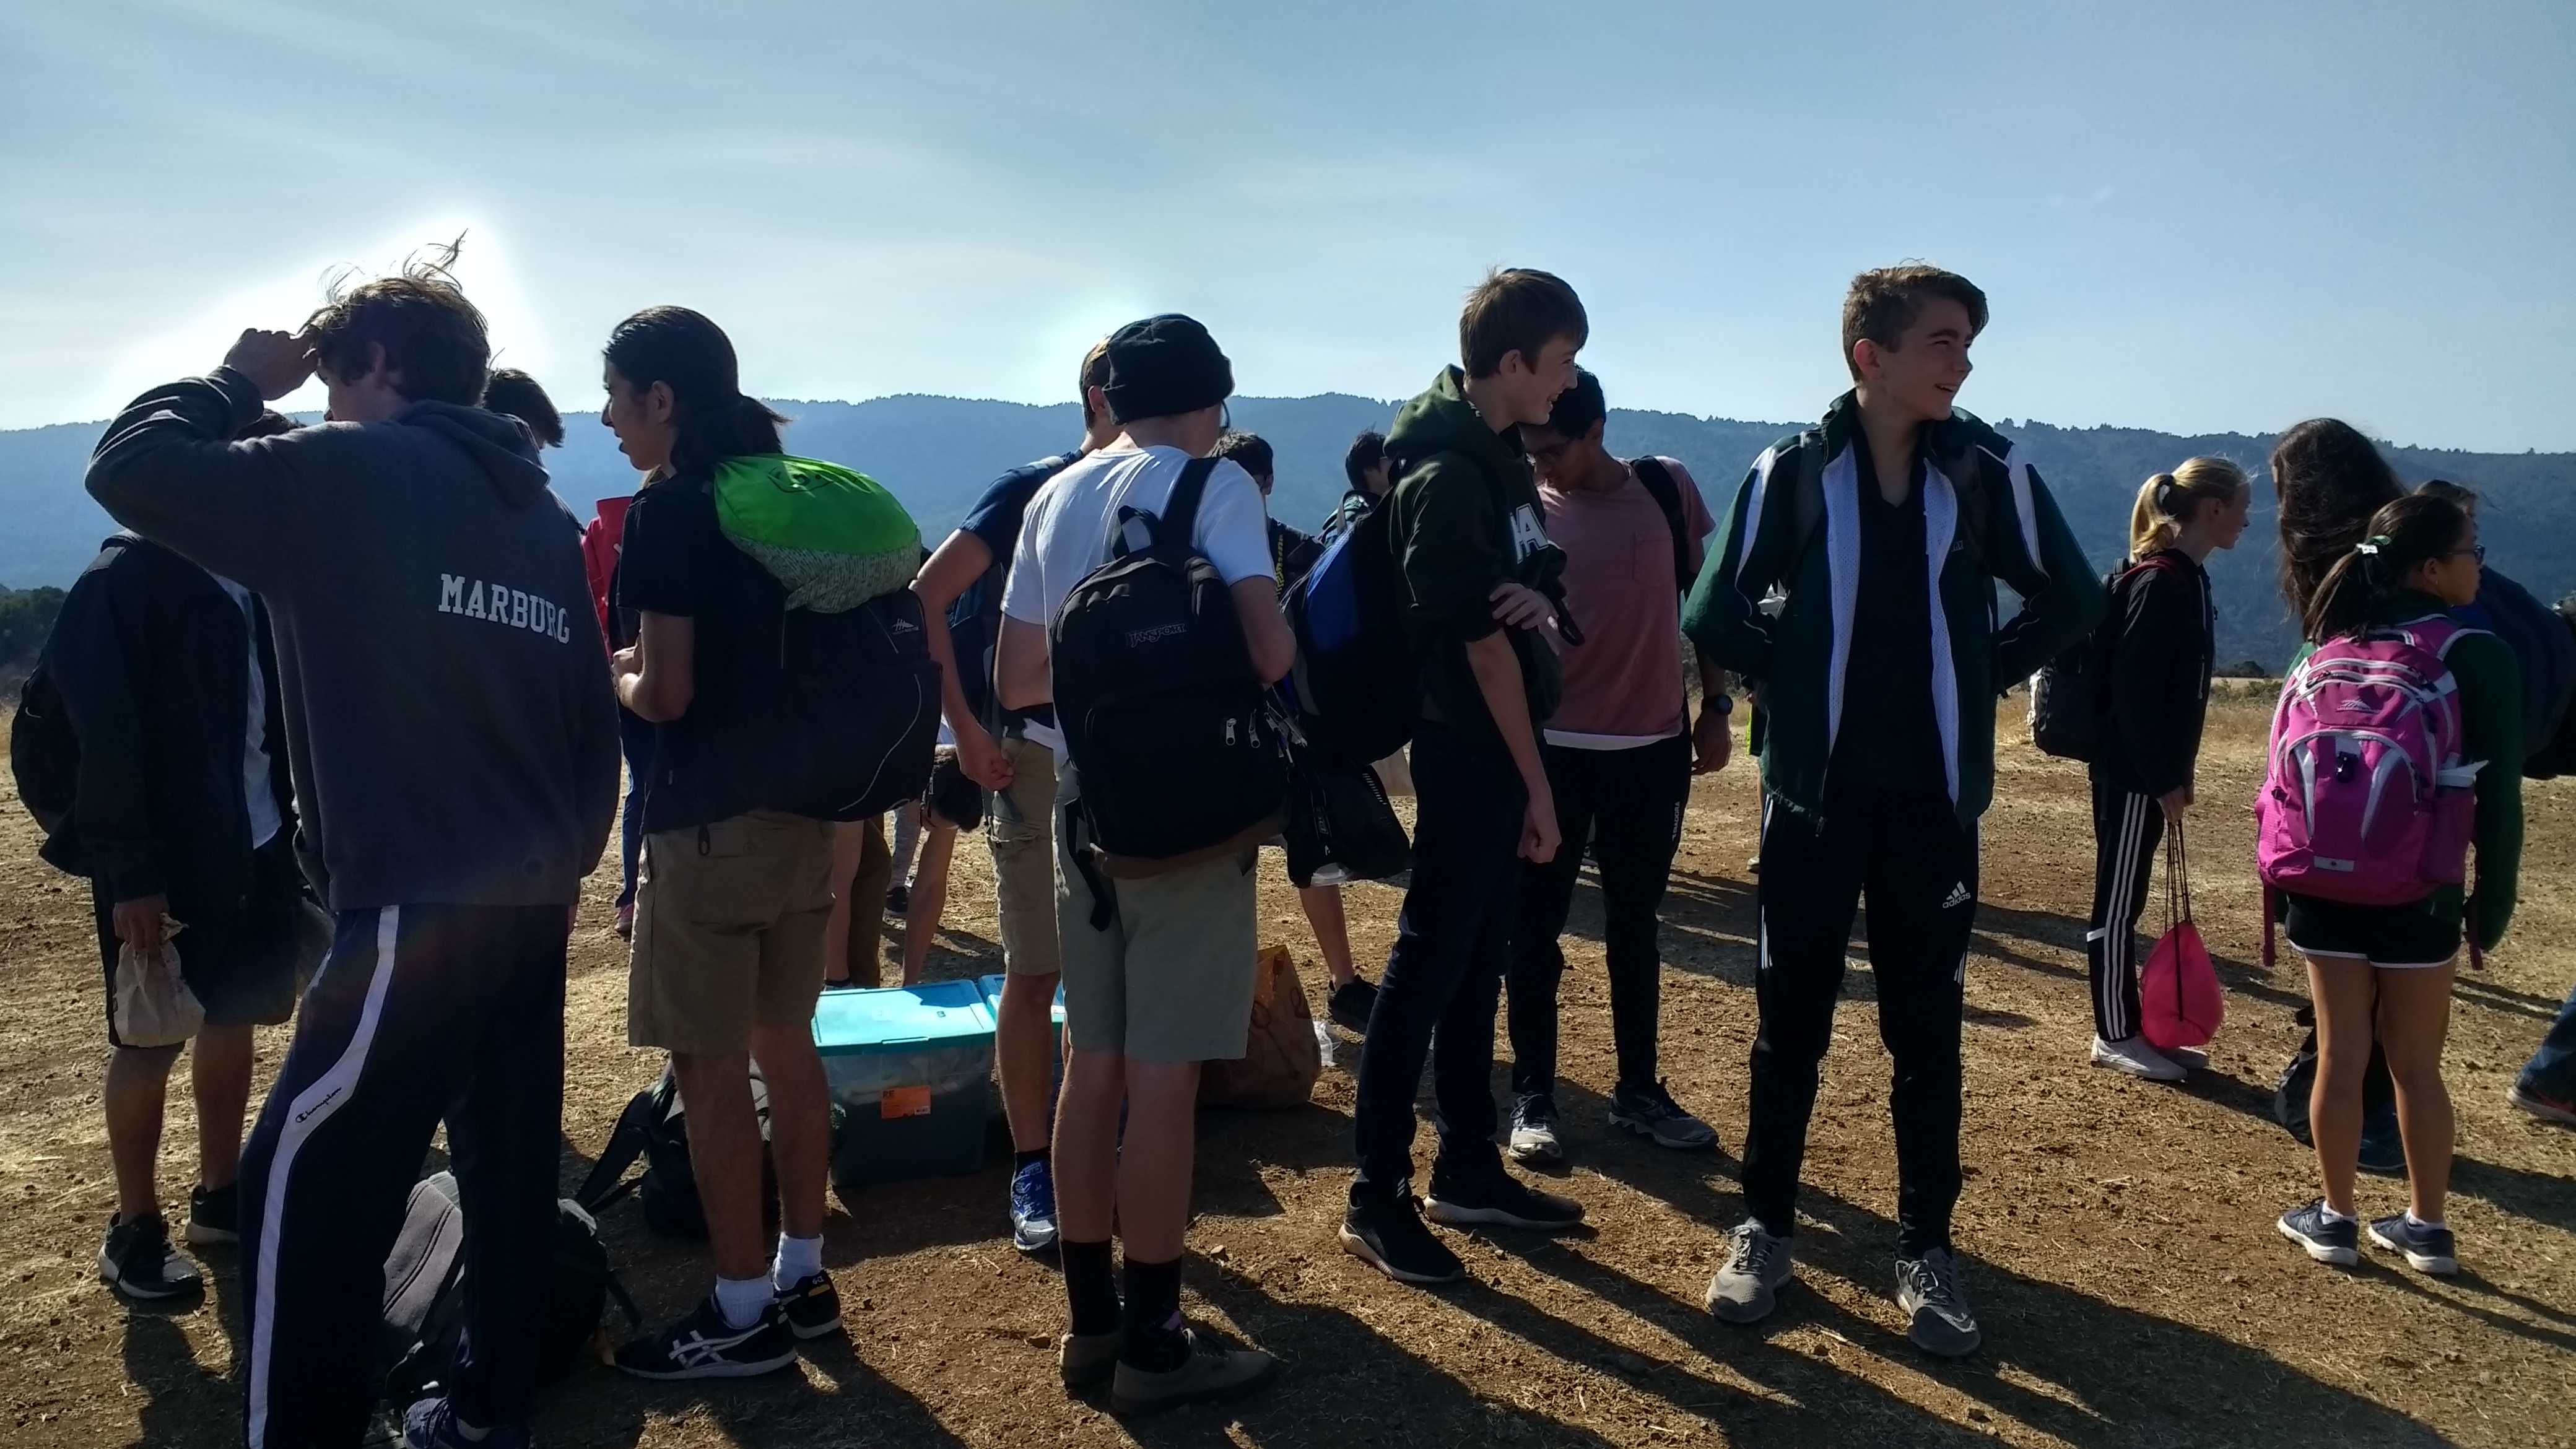 The Palo Alto High School cross country team arrives at Crystal Springs for the Santa Clara Valley Athletics League championship meet. This meet was extremely important for the team and qualified them for the Central Coast Section meet.